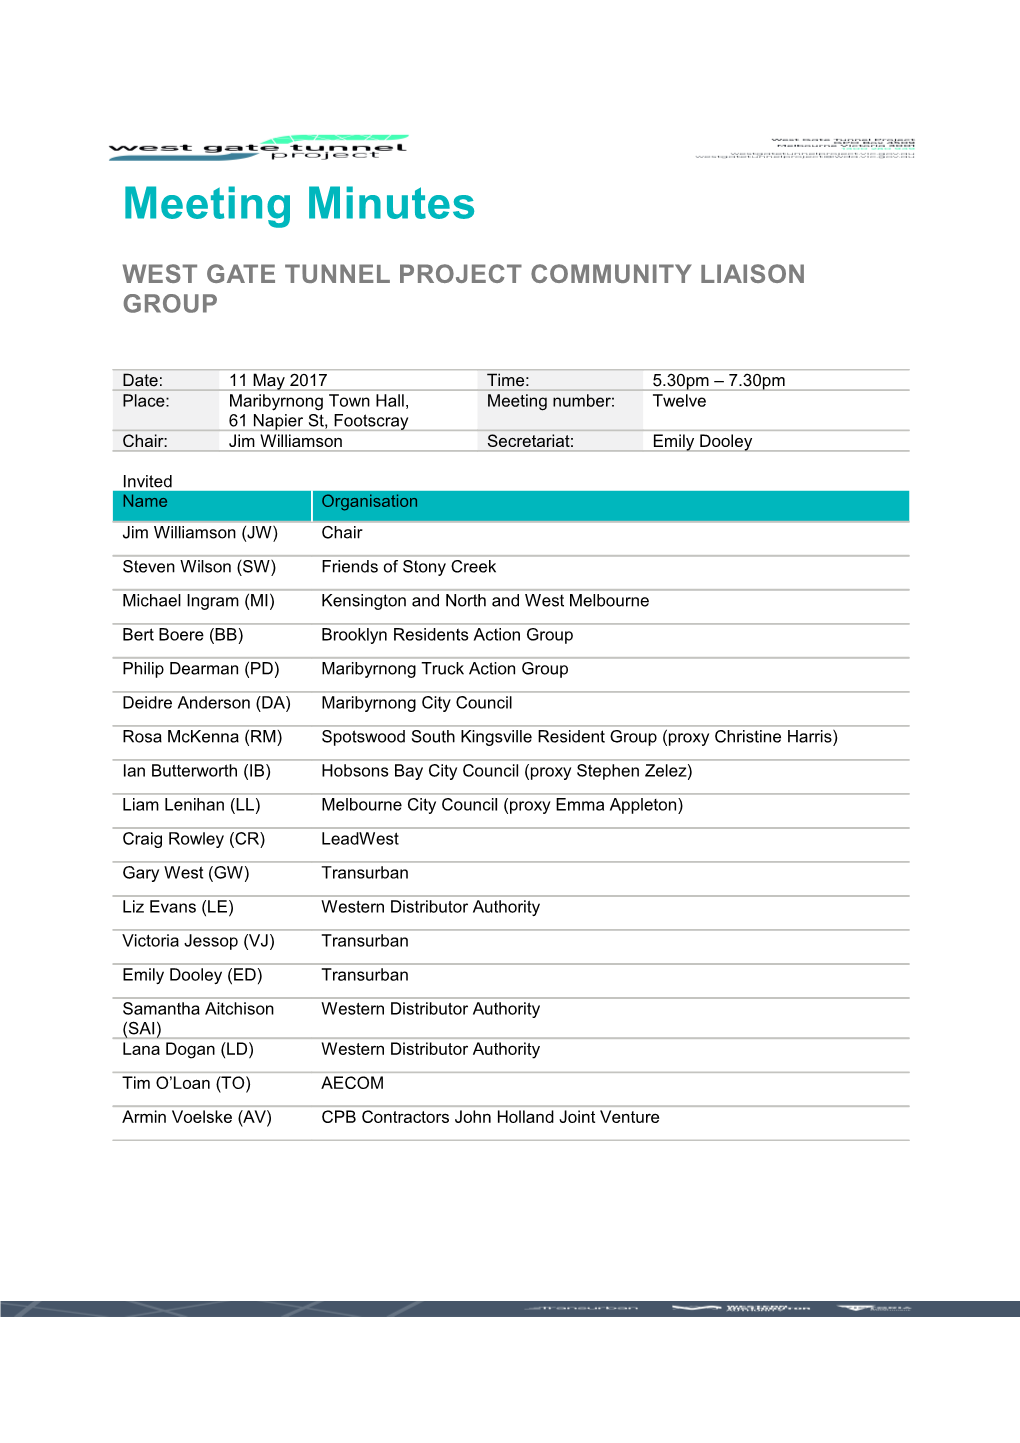 West Gate Tunnel Project Community Liaison Group